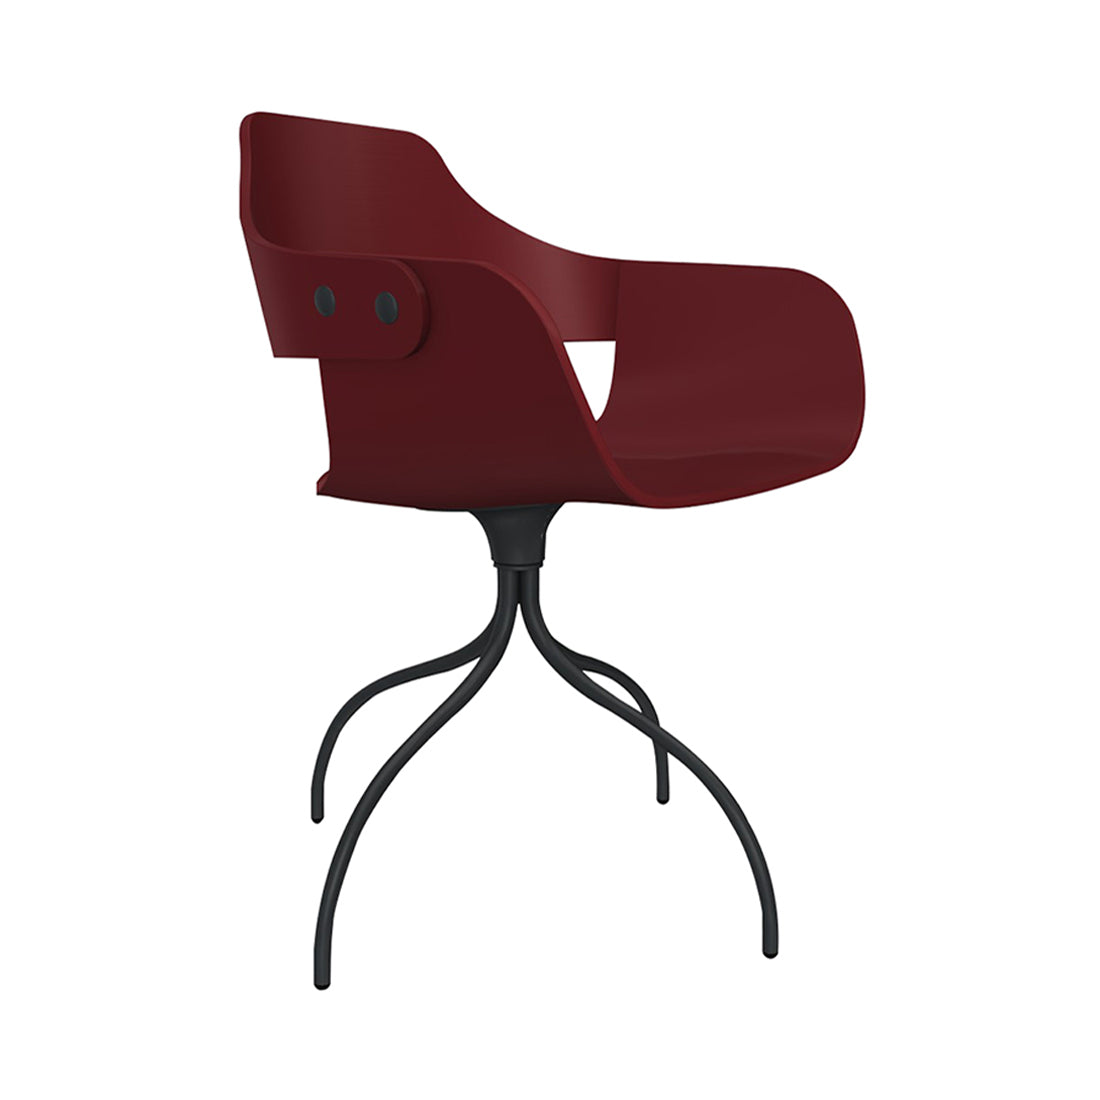 Showtime Chair with Swivel Base: Lacquered Red + Anthracite Grey